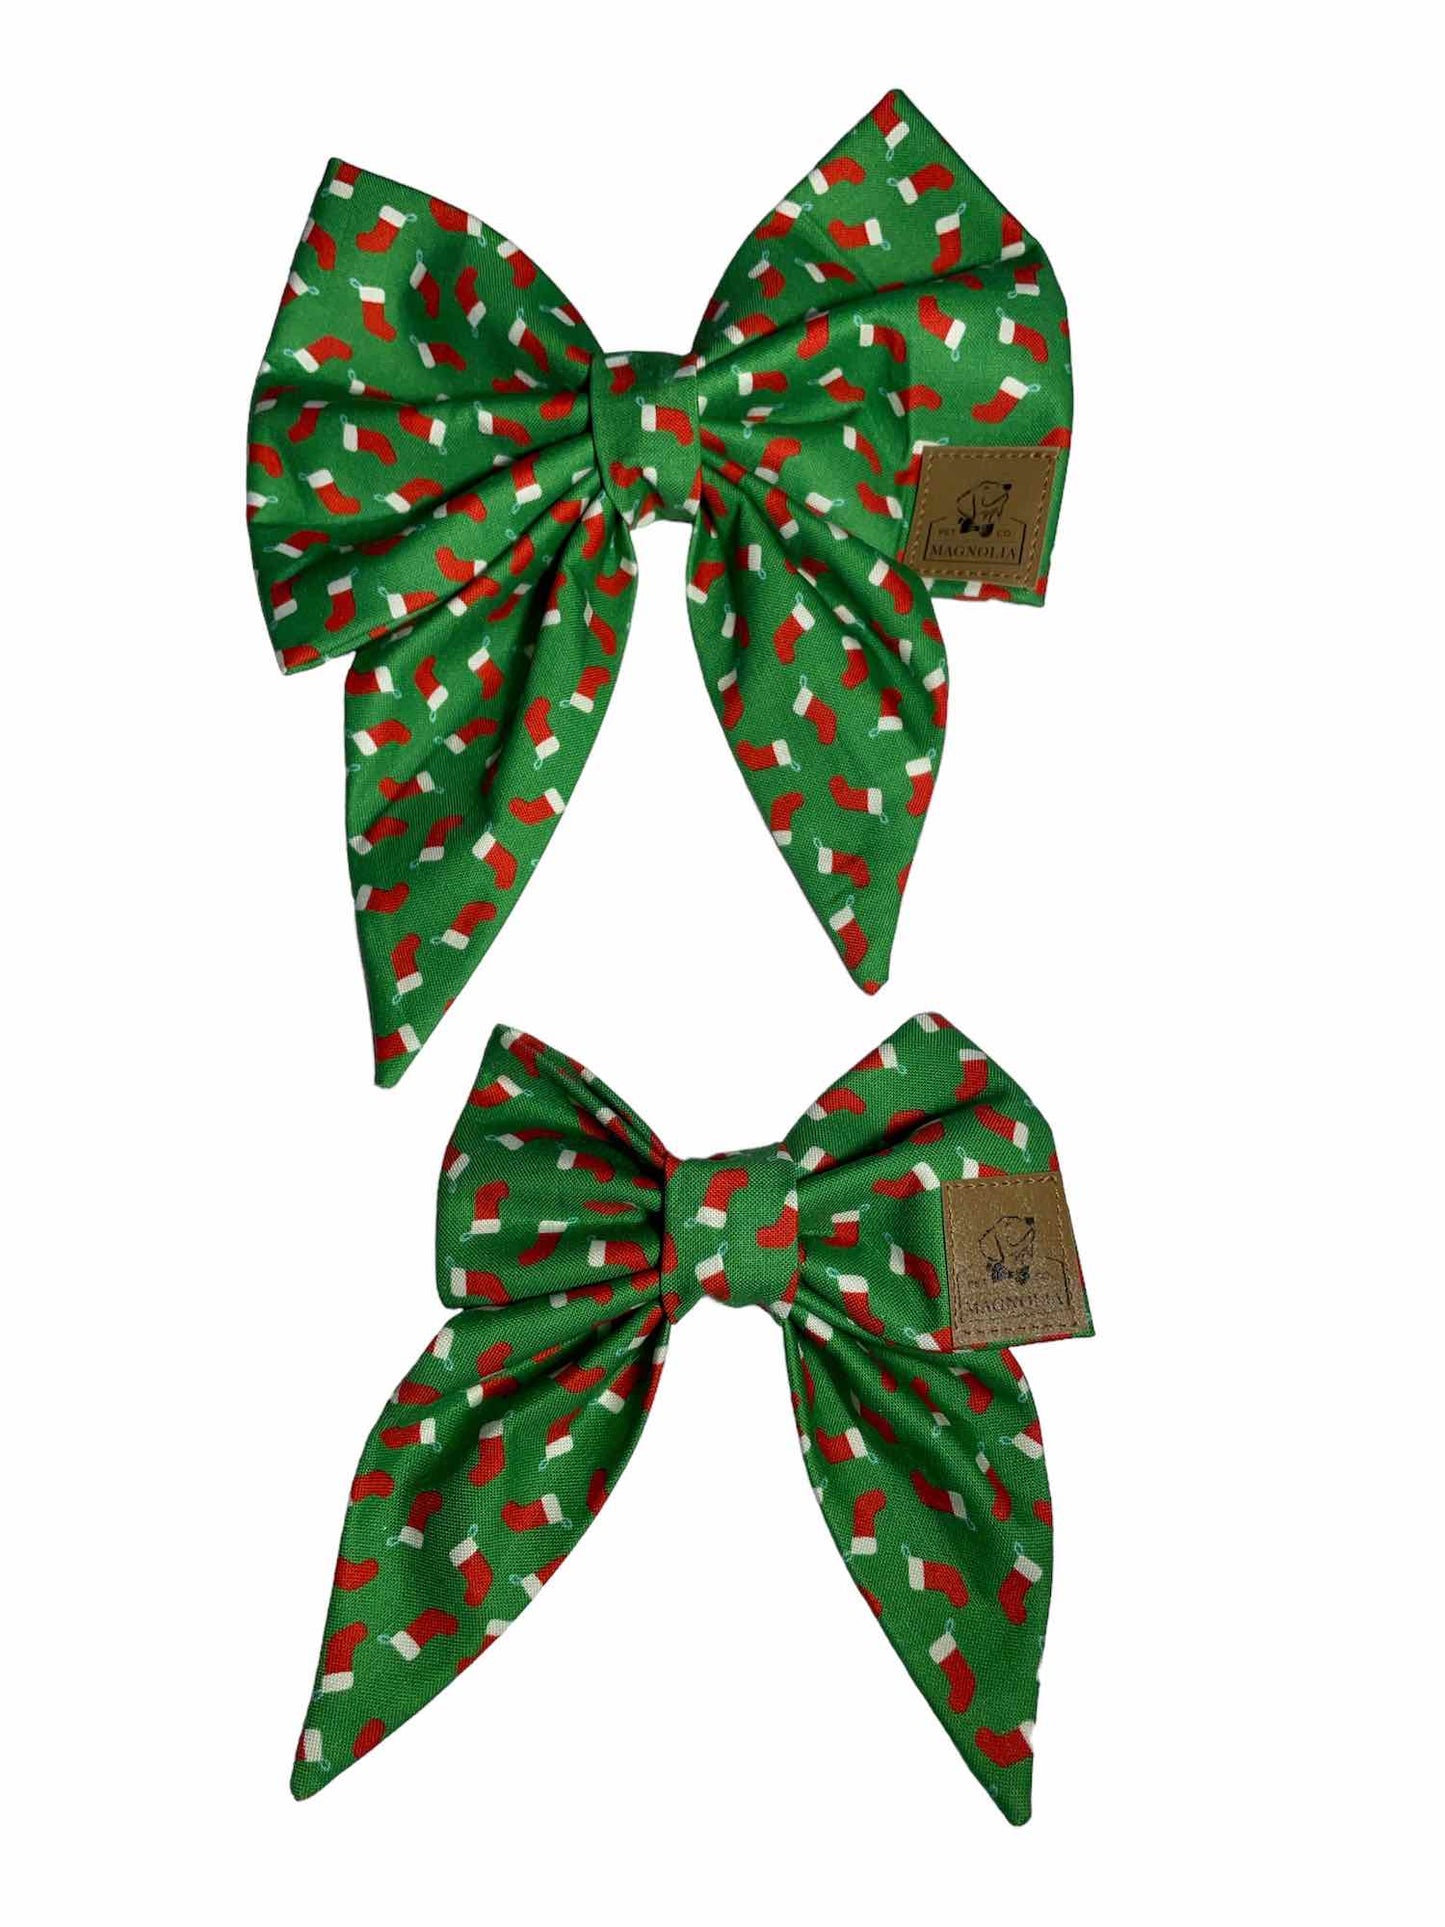 Stockings on Green Dog Bow